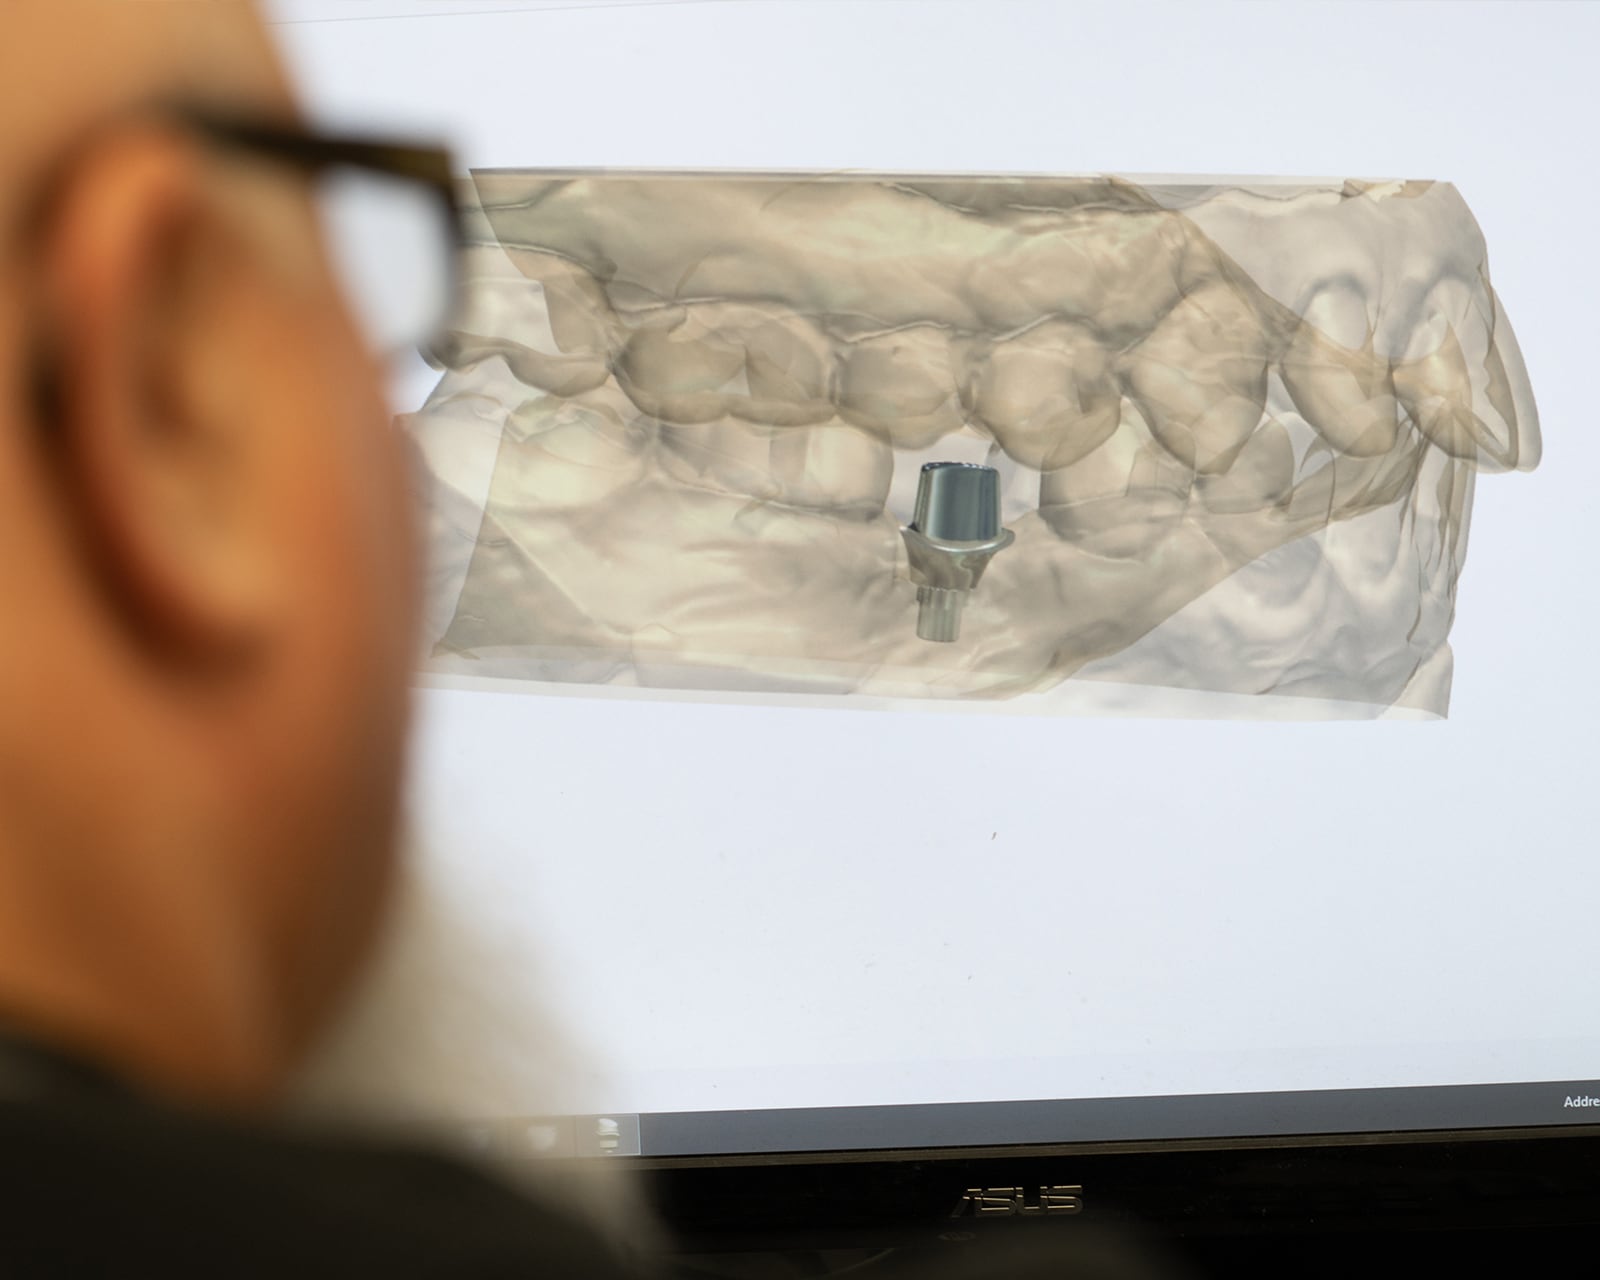 Dentist looking at 3D model of teeth on a screen.